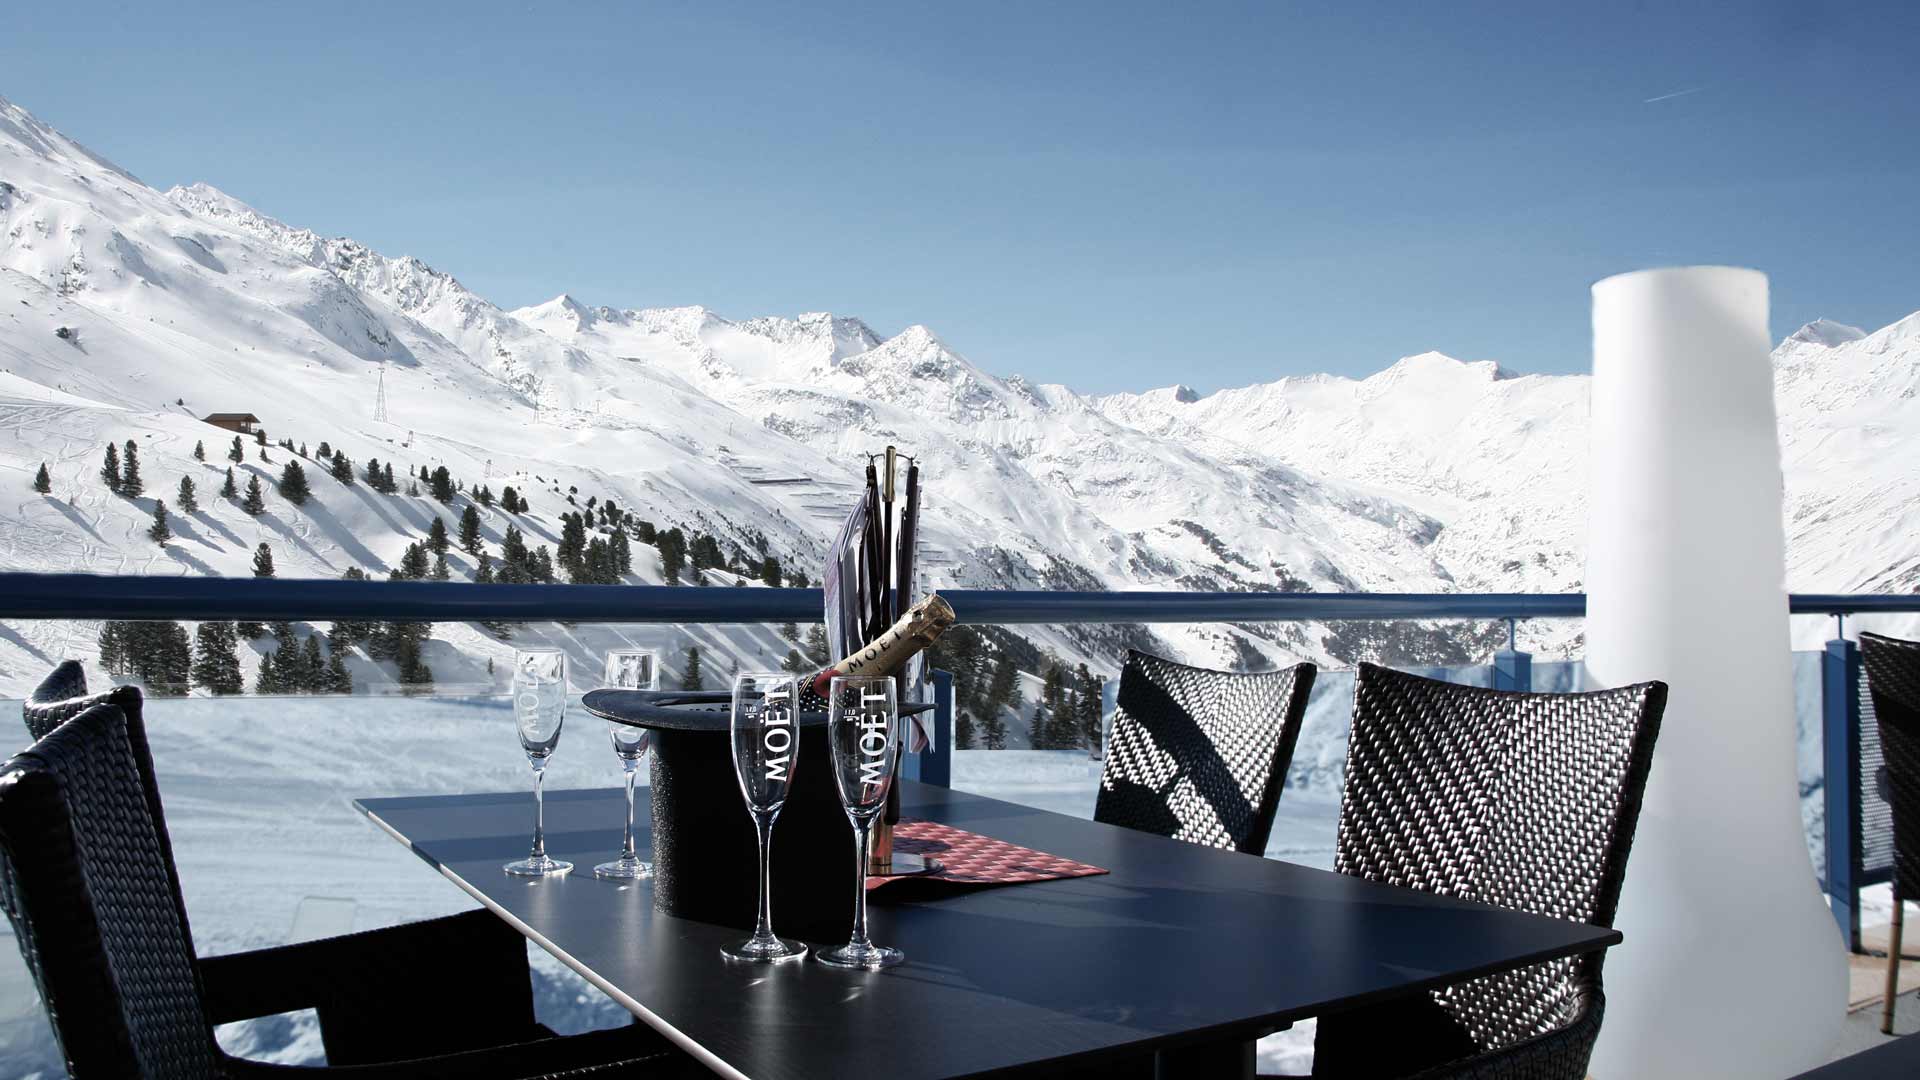 Try our Tyrolean specialties during your lunch time in Hochgurgl